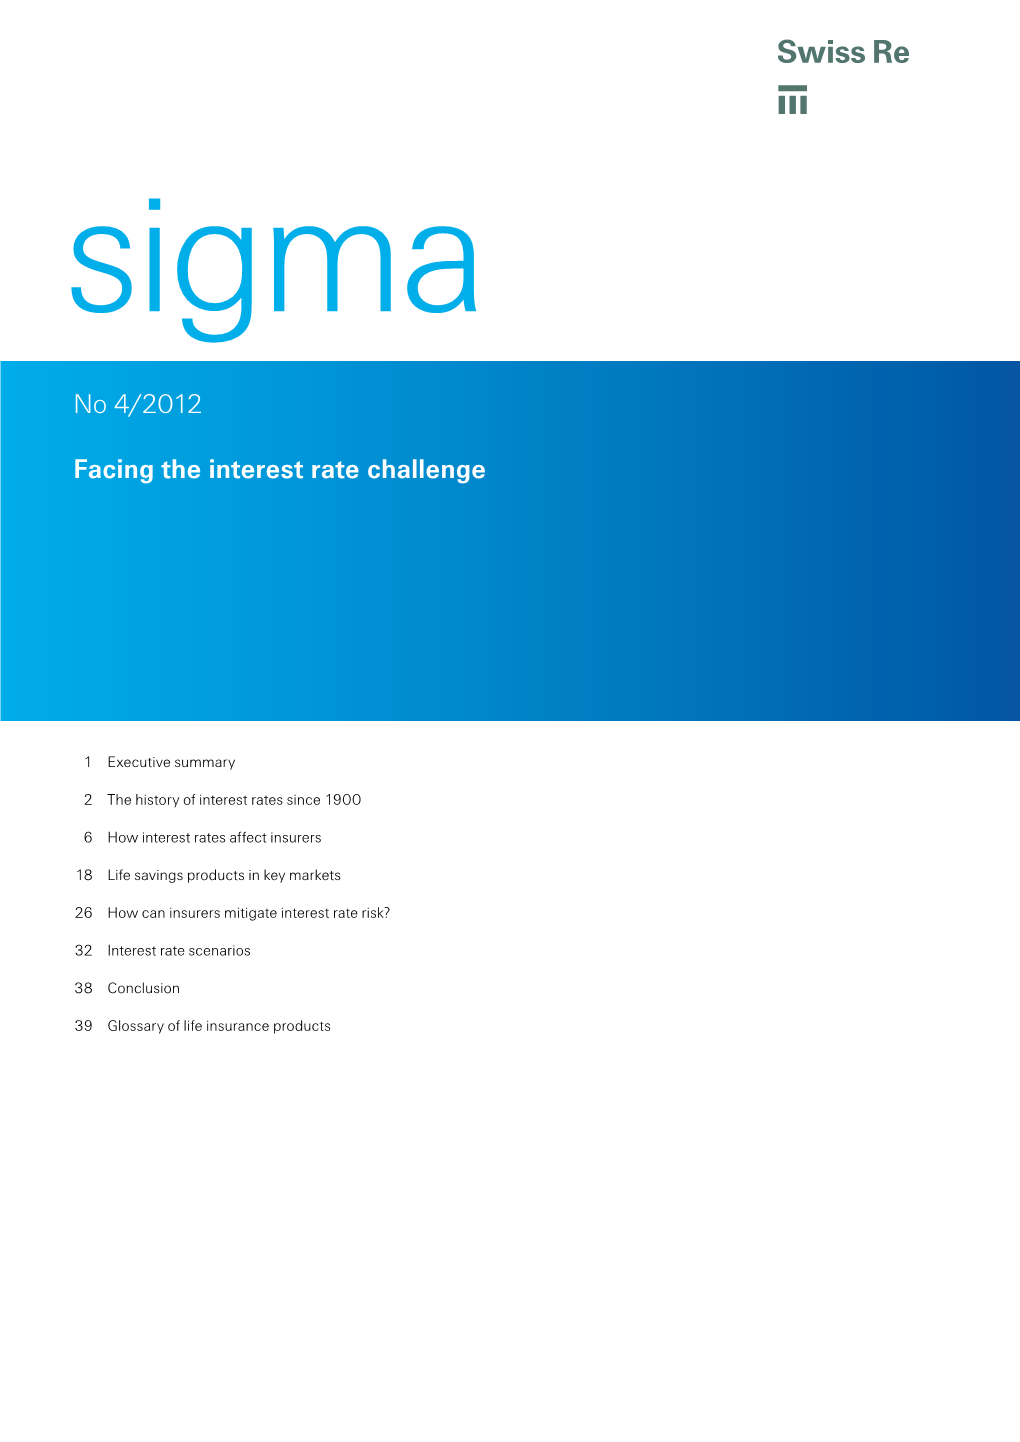 Sigma No 4/2012 Facing the Interest Rate Challange